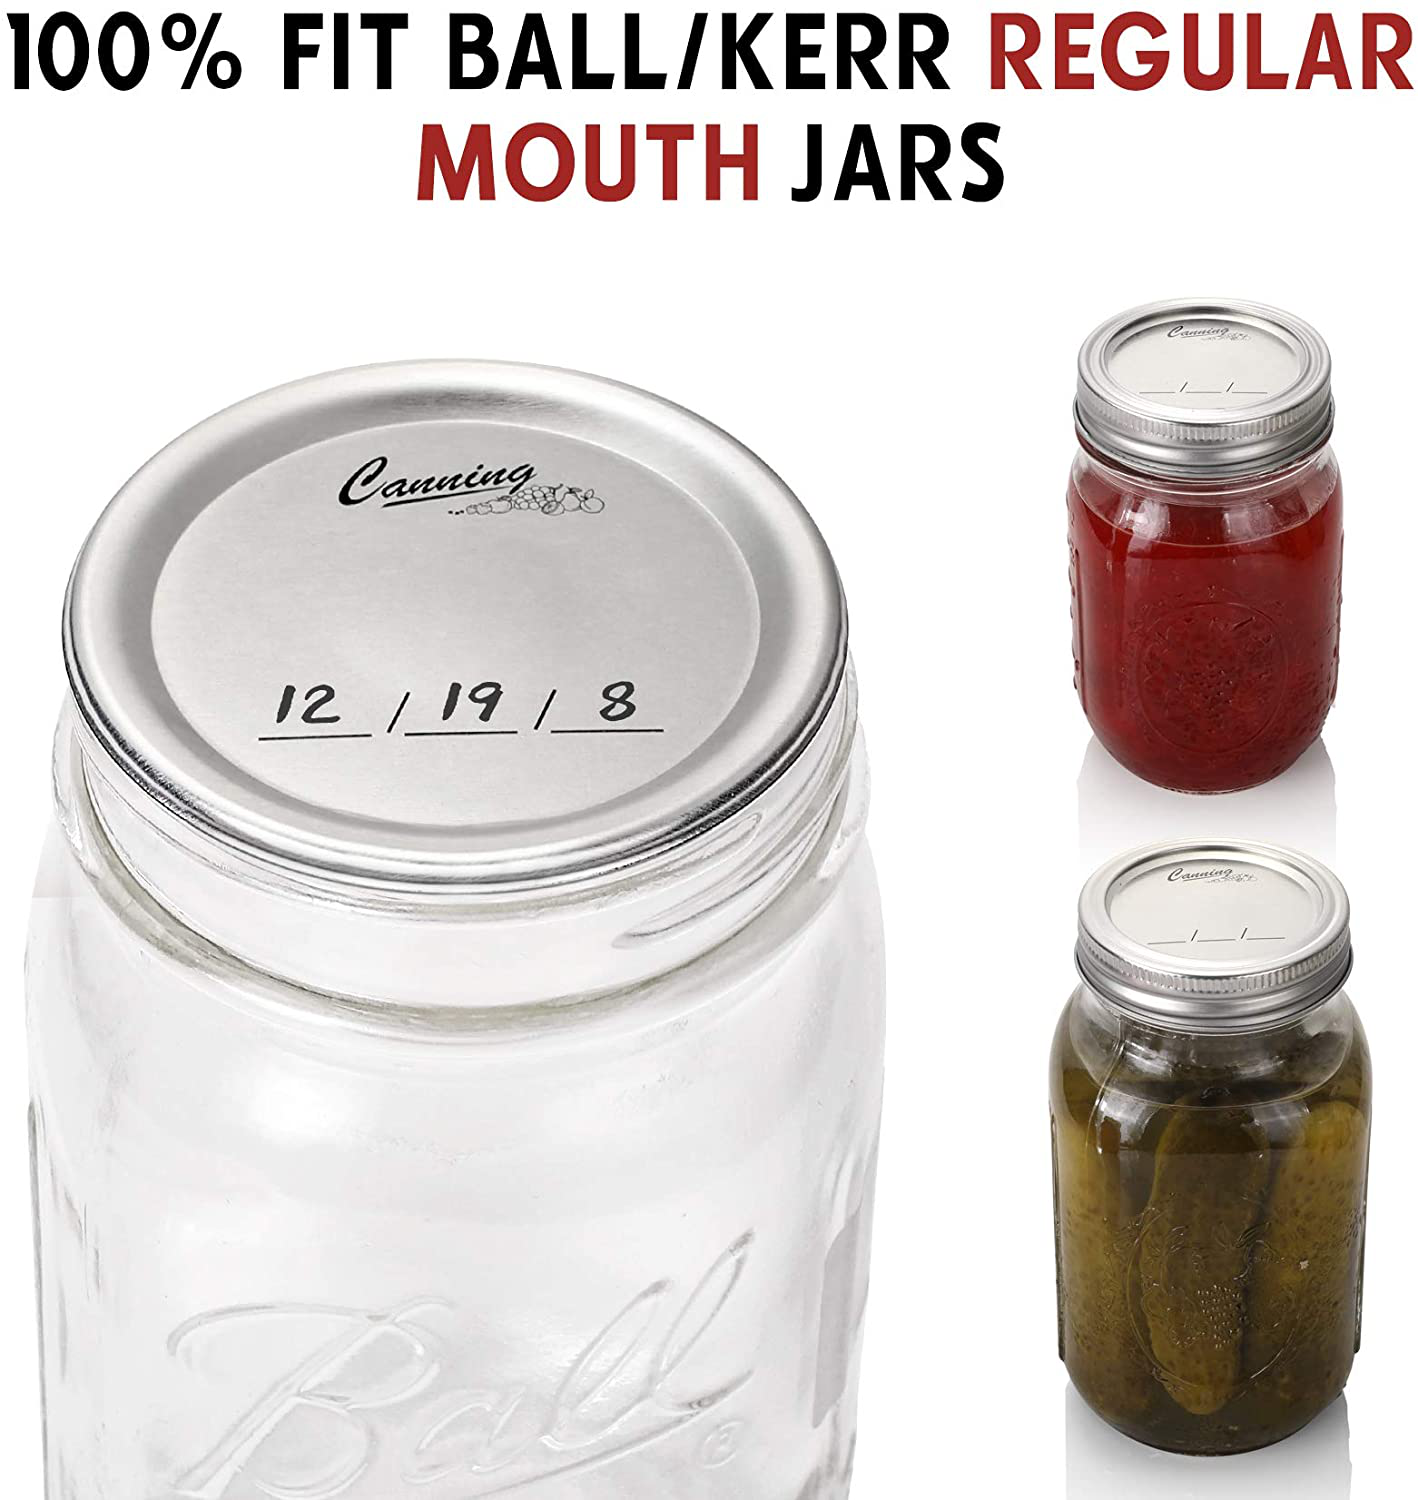 AOZITA 60-Count, [WIDE Mouth] Canning Lids for Ball, Kerr Jars - Split-Type Metal Mason Jar Lids for Canning - Food Grade Material, 100% Fit & Airtight for Wide Mouth Jars